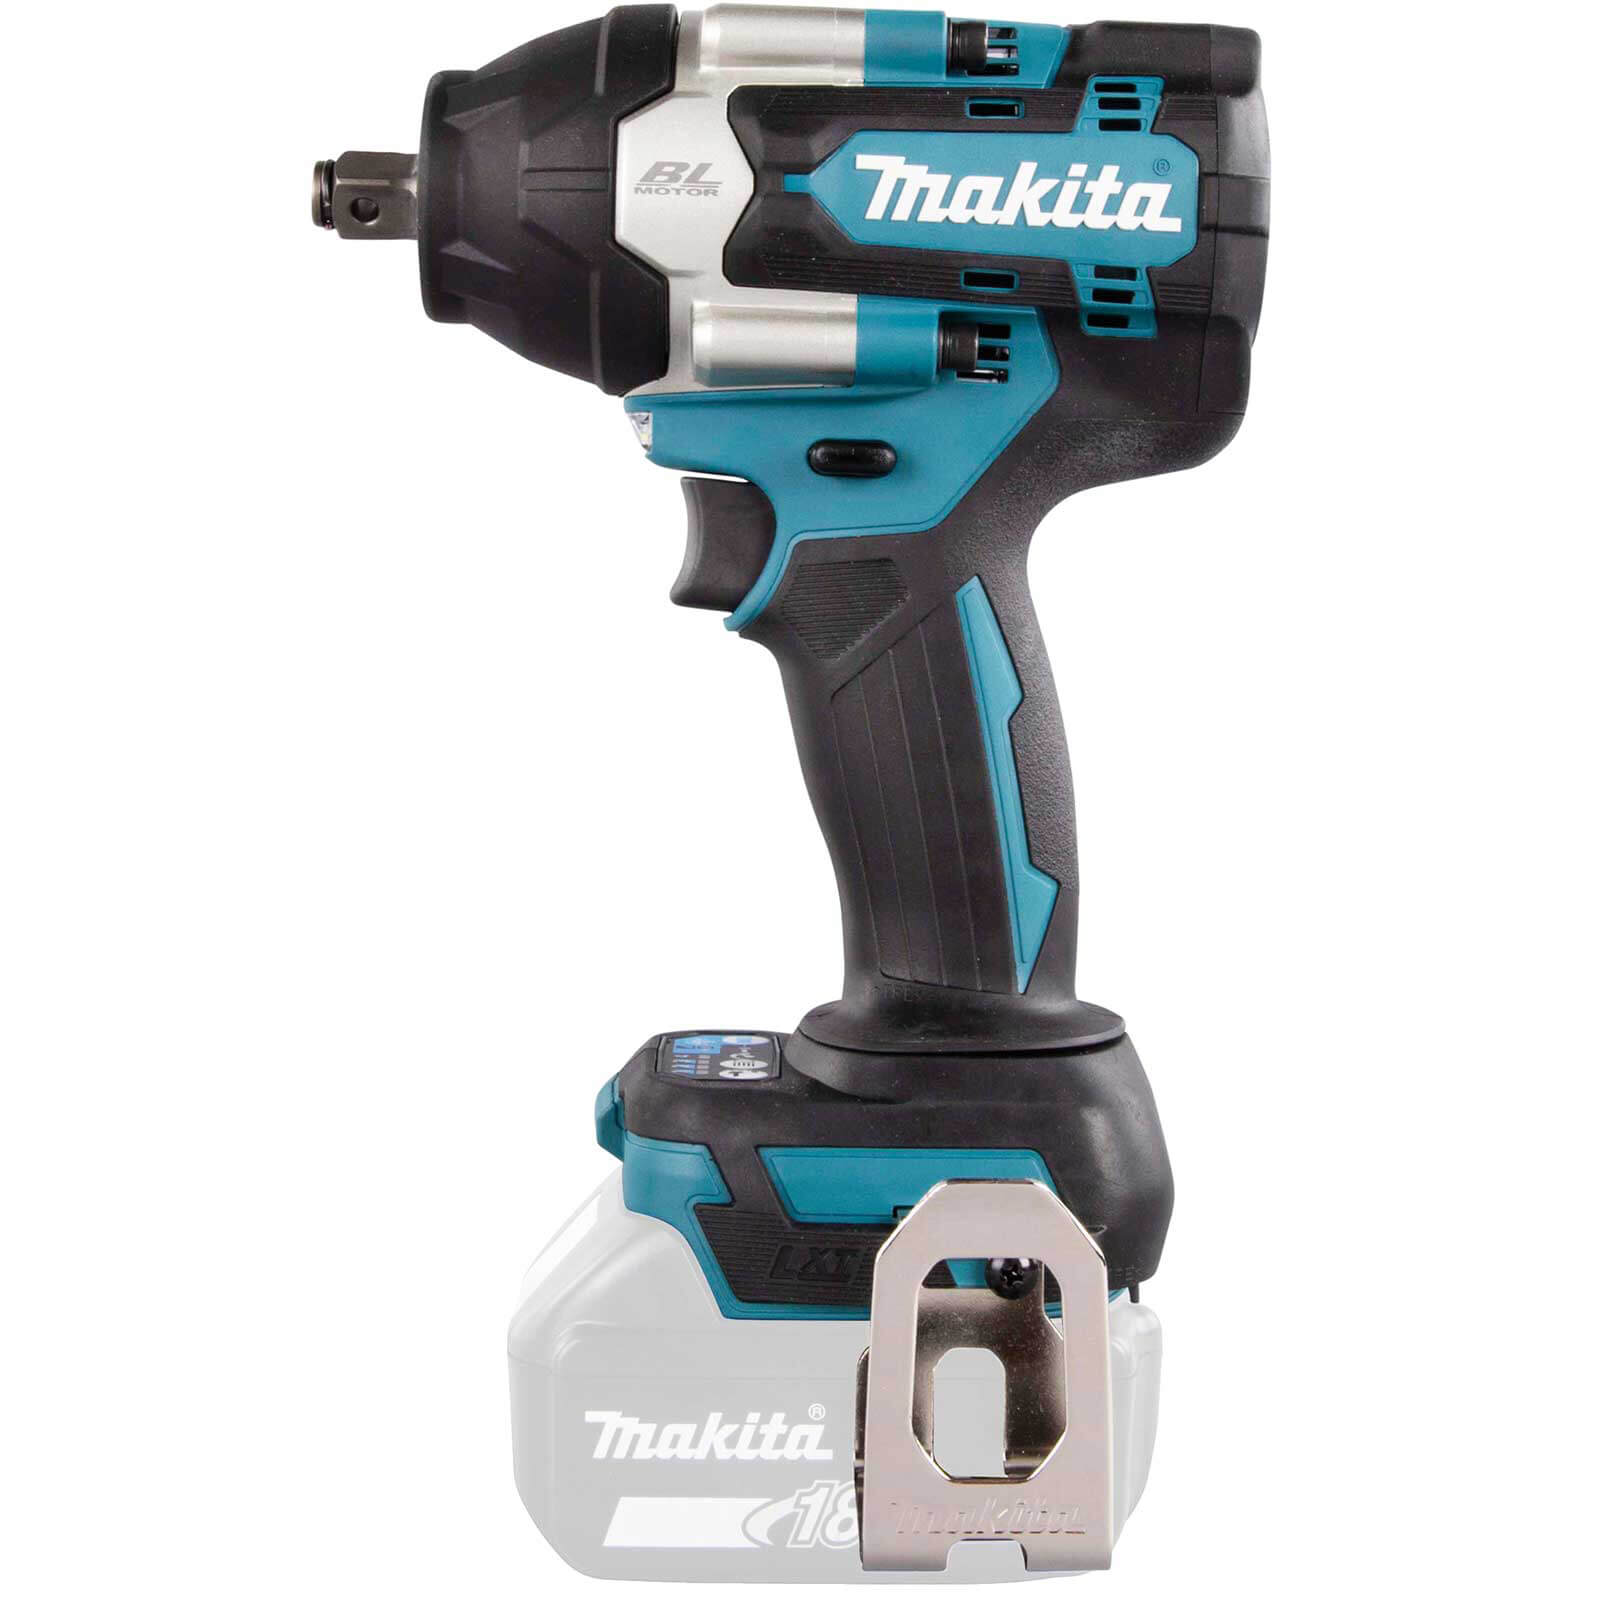 Makita DTW700 18v LXT Cordless Brushless 1/2" Drive Impact Wrench No Batteries No Charger No Case